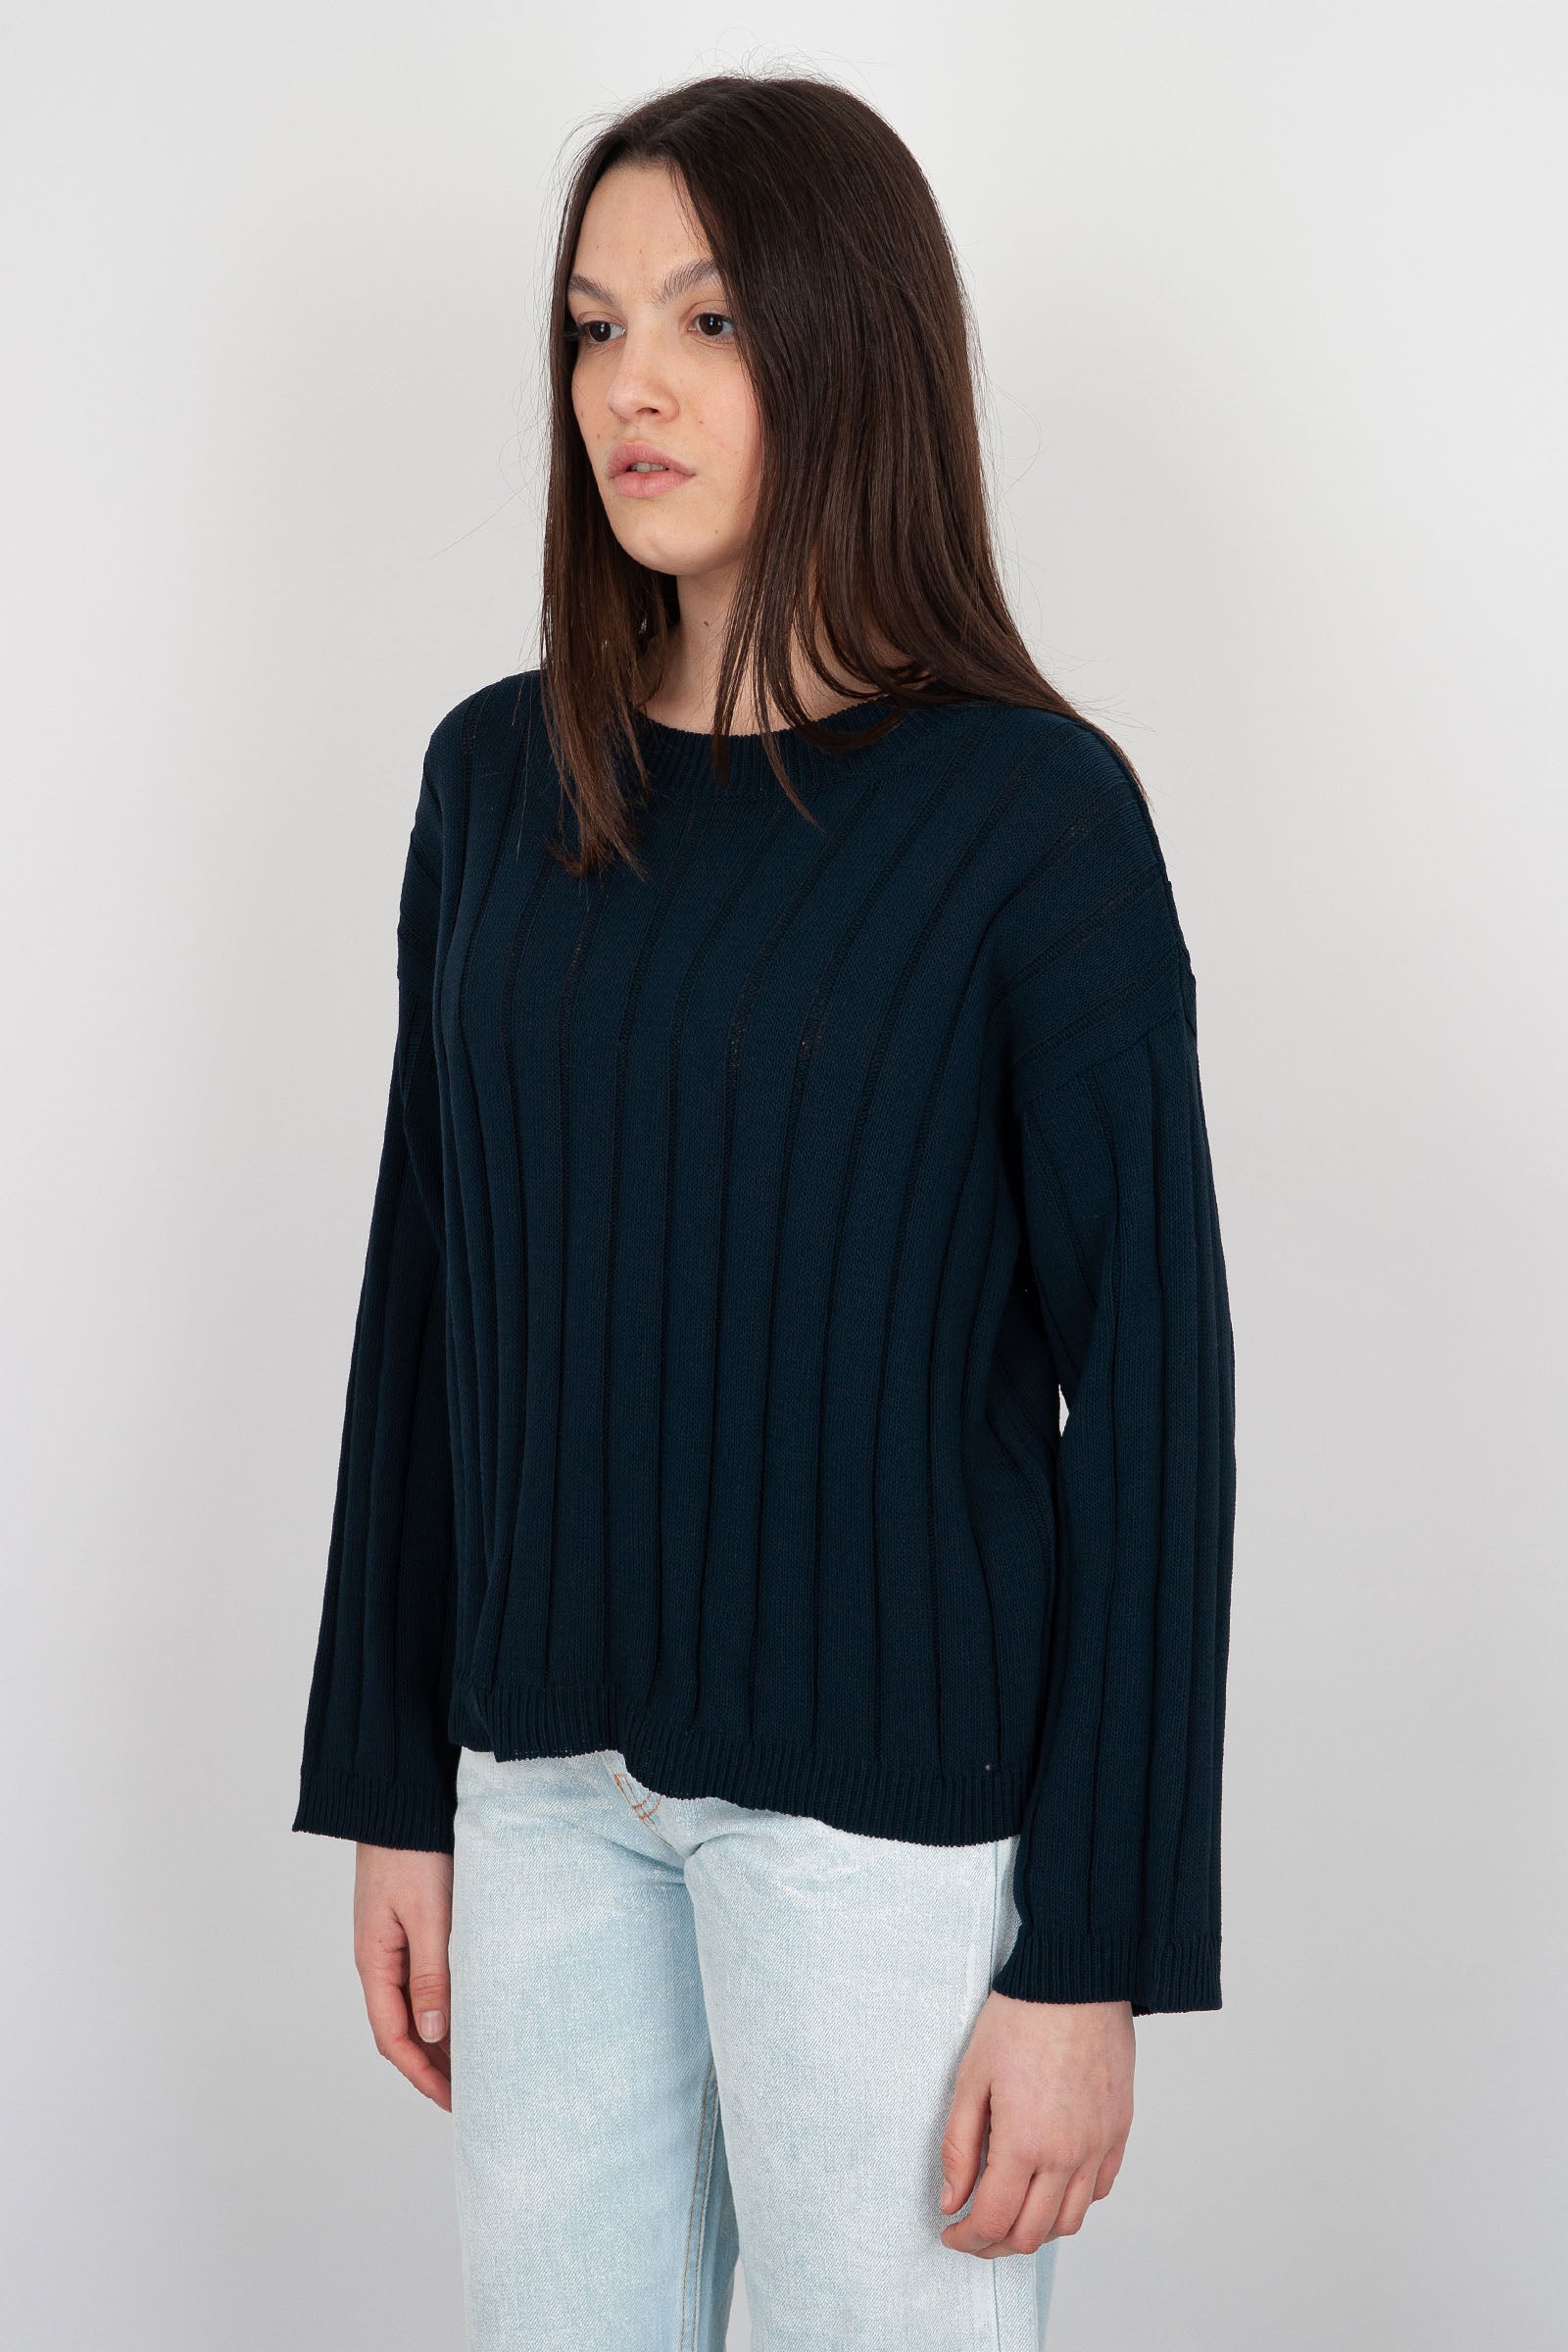 Grifoni Ribbed Cotton Navy Blue Sweater - 3